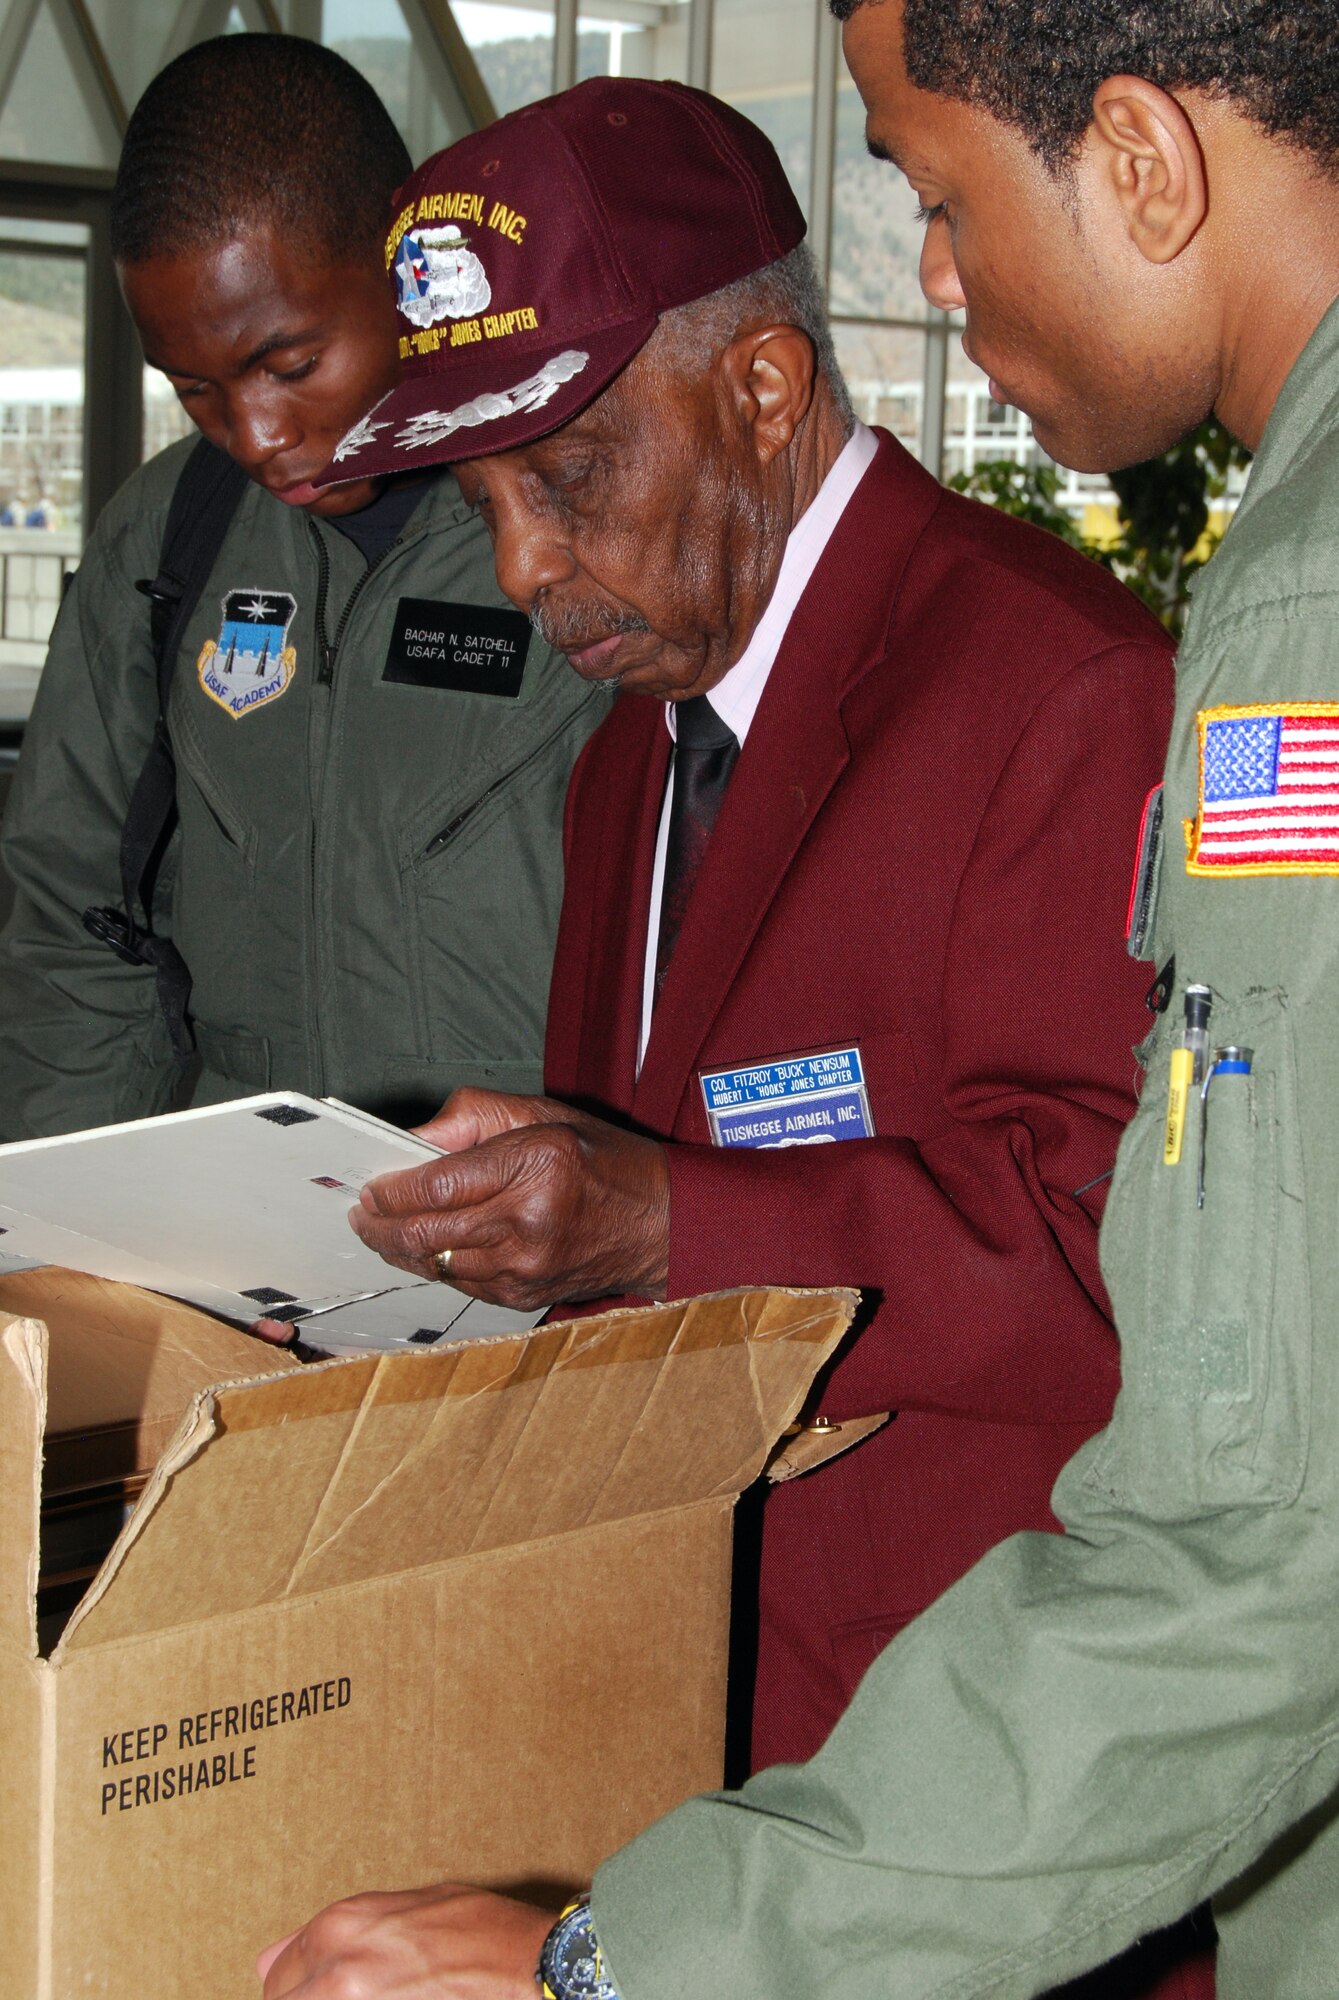 Retired Col. Fitzroy "Buck" Newsum shows Tuskegee Airmen memorabilia to Cadets 3rd Class Bachar Satchell and Kyle Foley during a visit to the U.S. Air Force Academy, Colo., April 24. Mr. Newsum, one of the original Tuskegee Airmen, served under Brig. Gen. Benjamin O. Davis Sr. and then-Col. Benjamin O. Davis Jr. He was assigned to the 617th Bombardment Group during World War II. (U.S. Air Force photo/Staff Sgt. Don Branum)